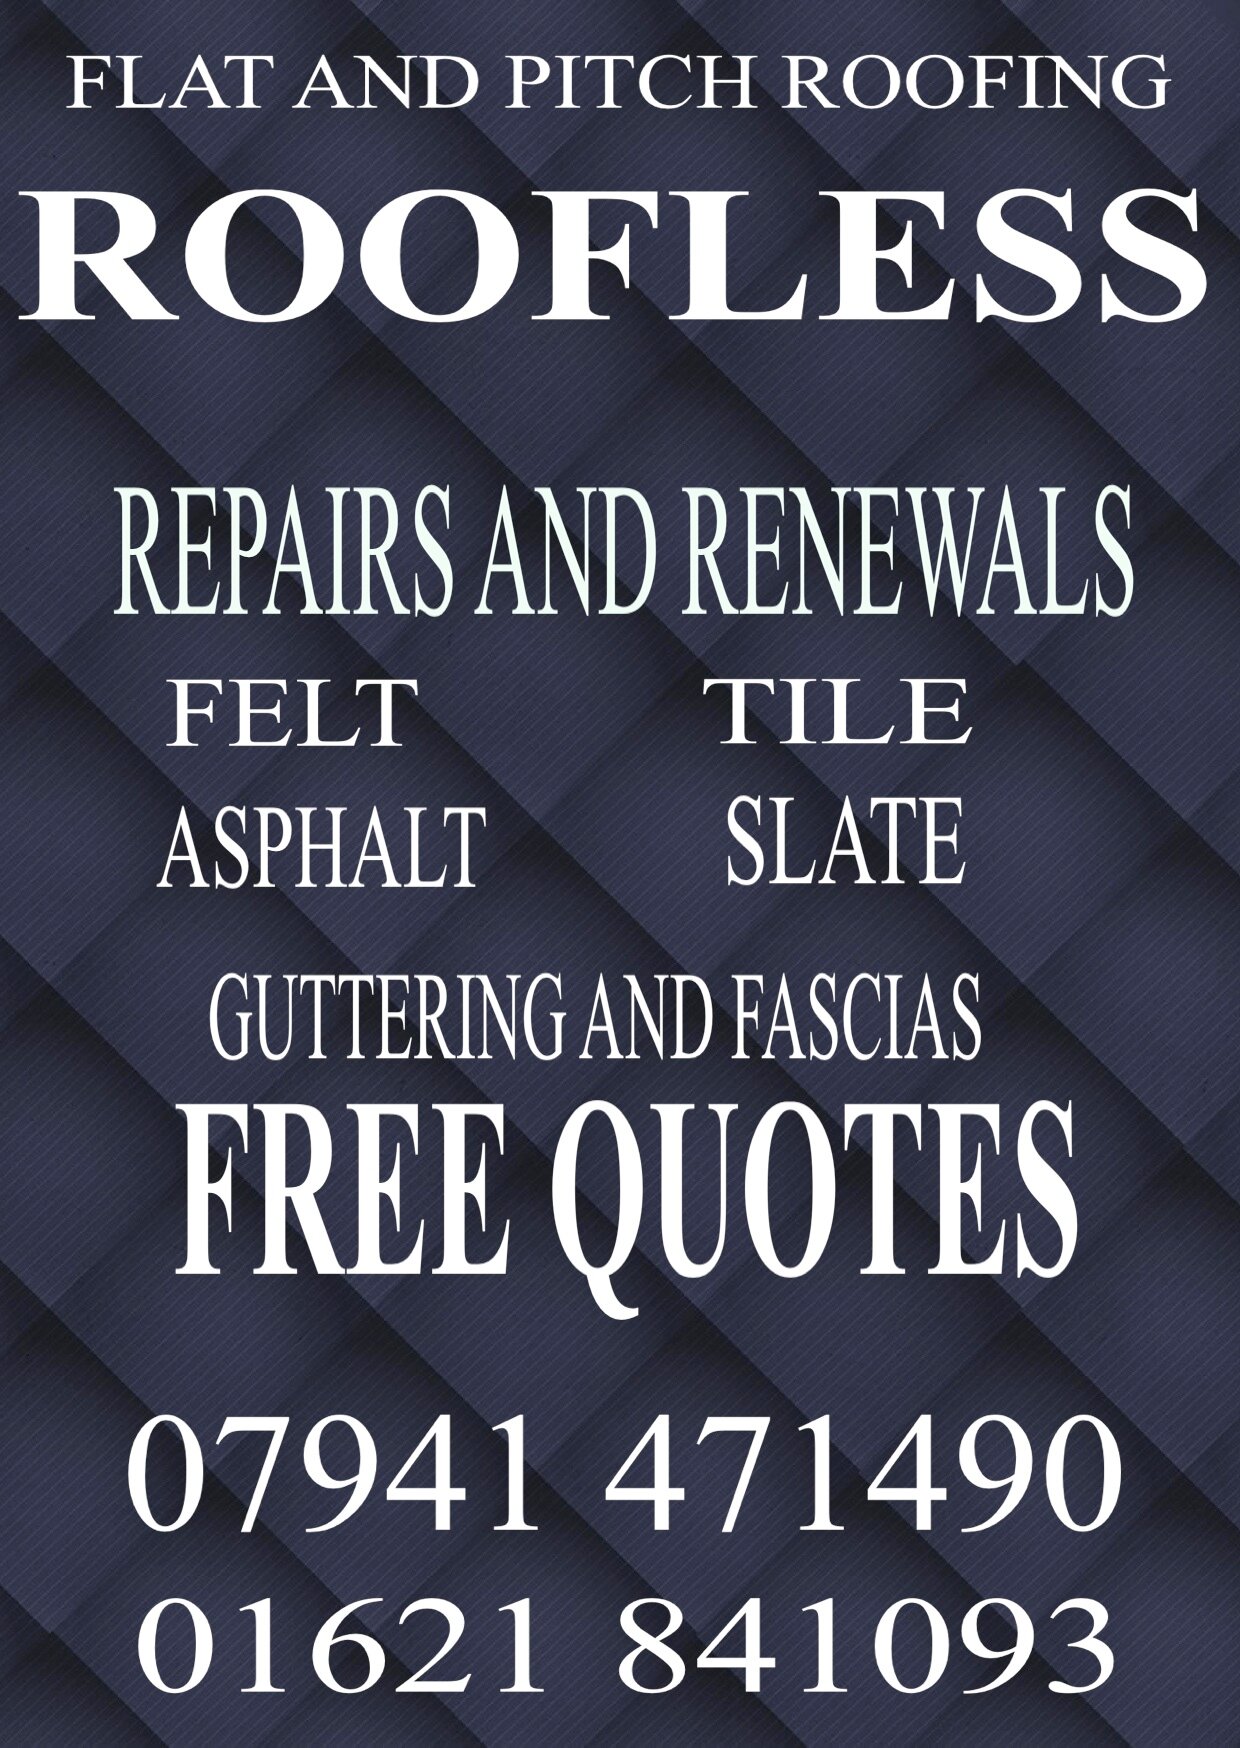 ALL FLAT AND PITCH ROOFS , NEW OR OLD , REPAIR OR RE-NEW FOR ESSEX